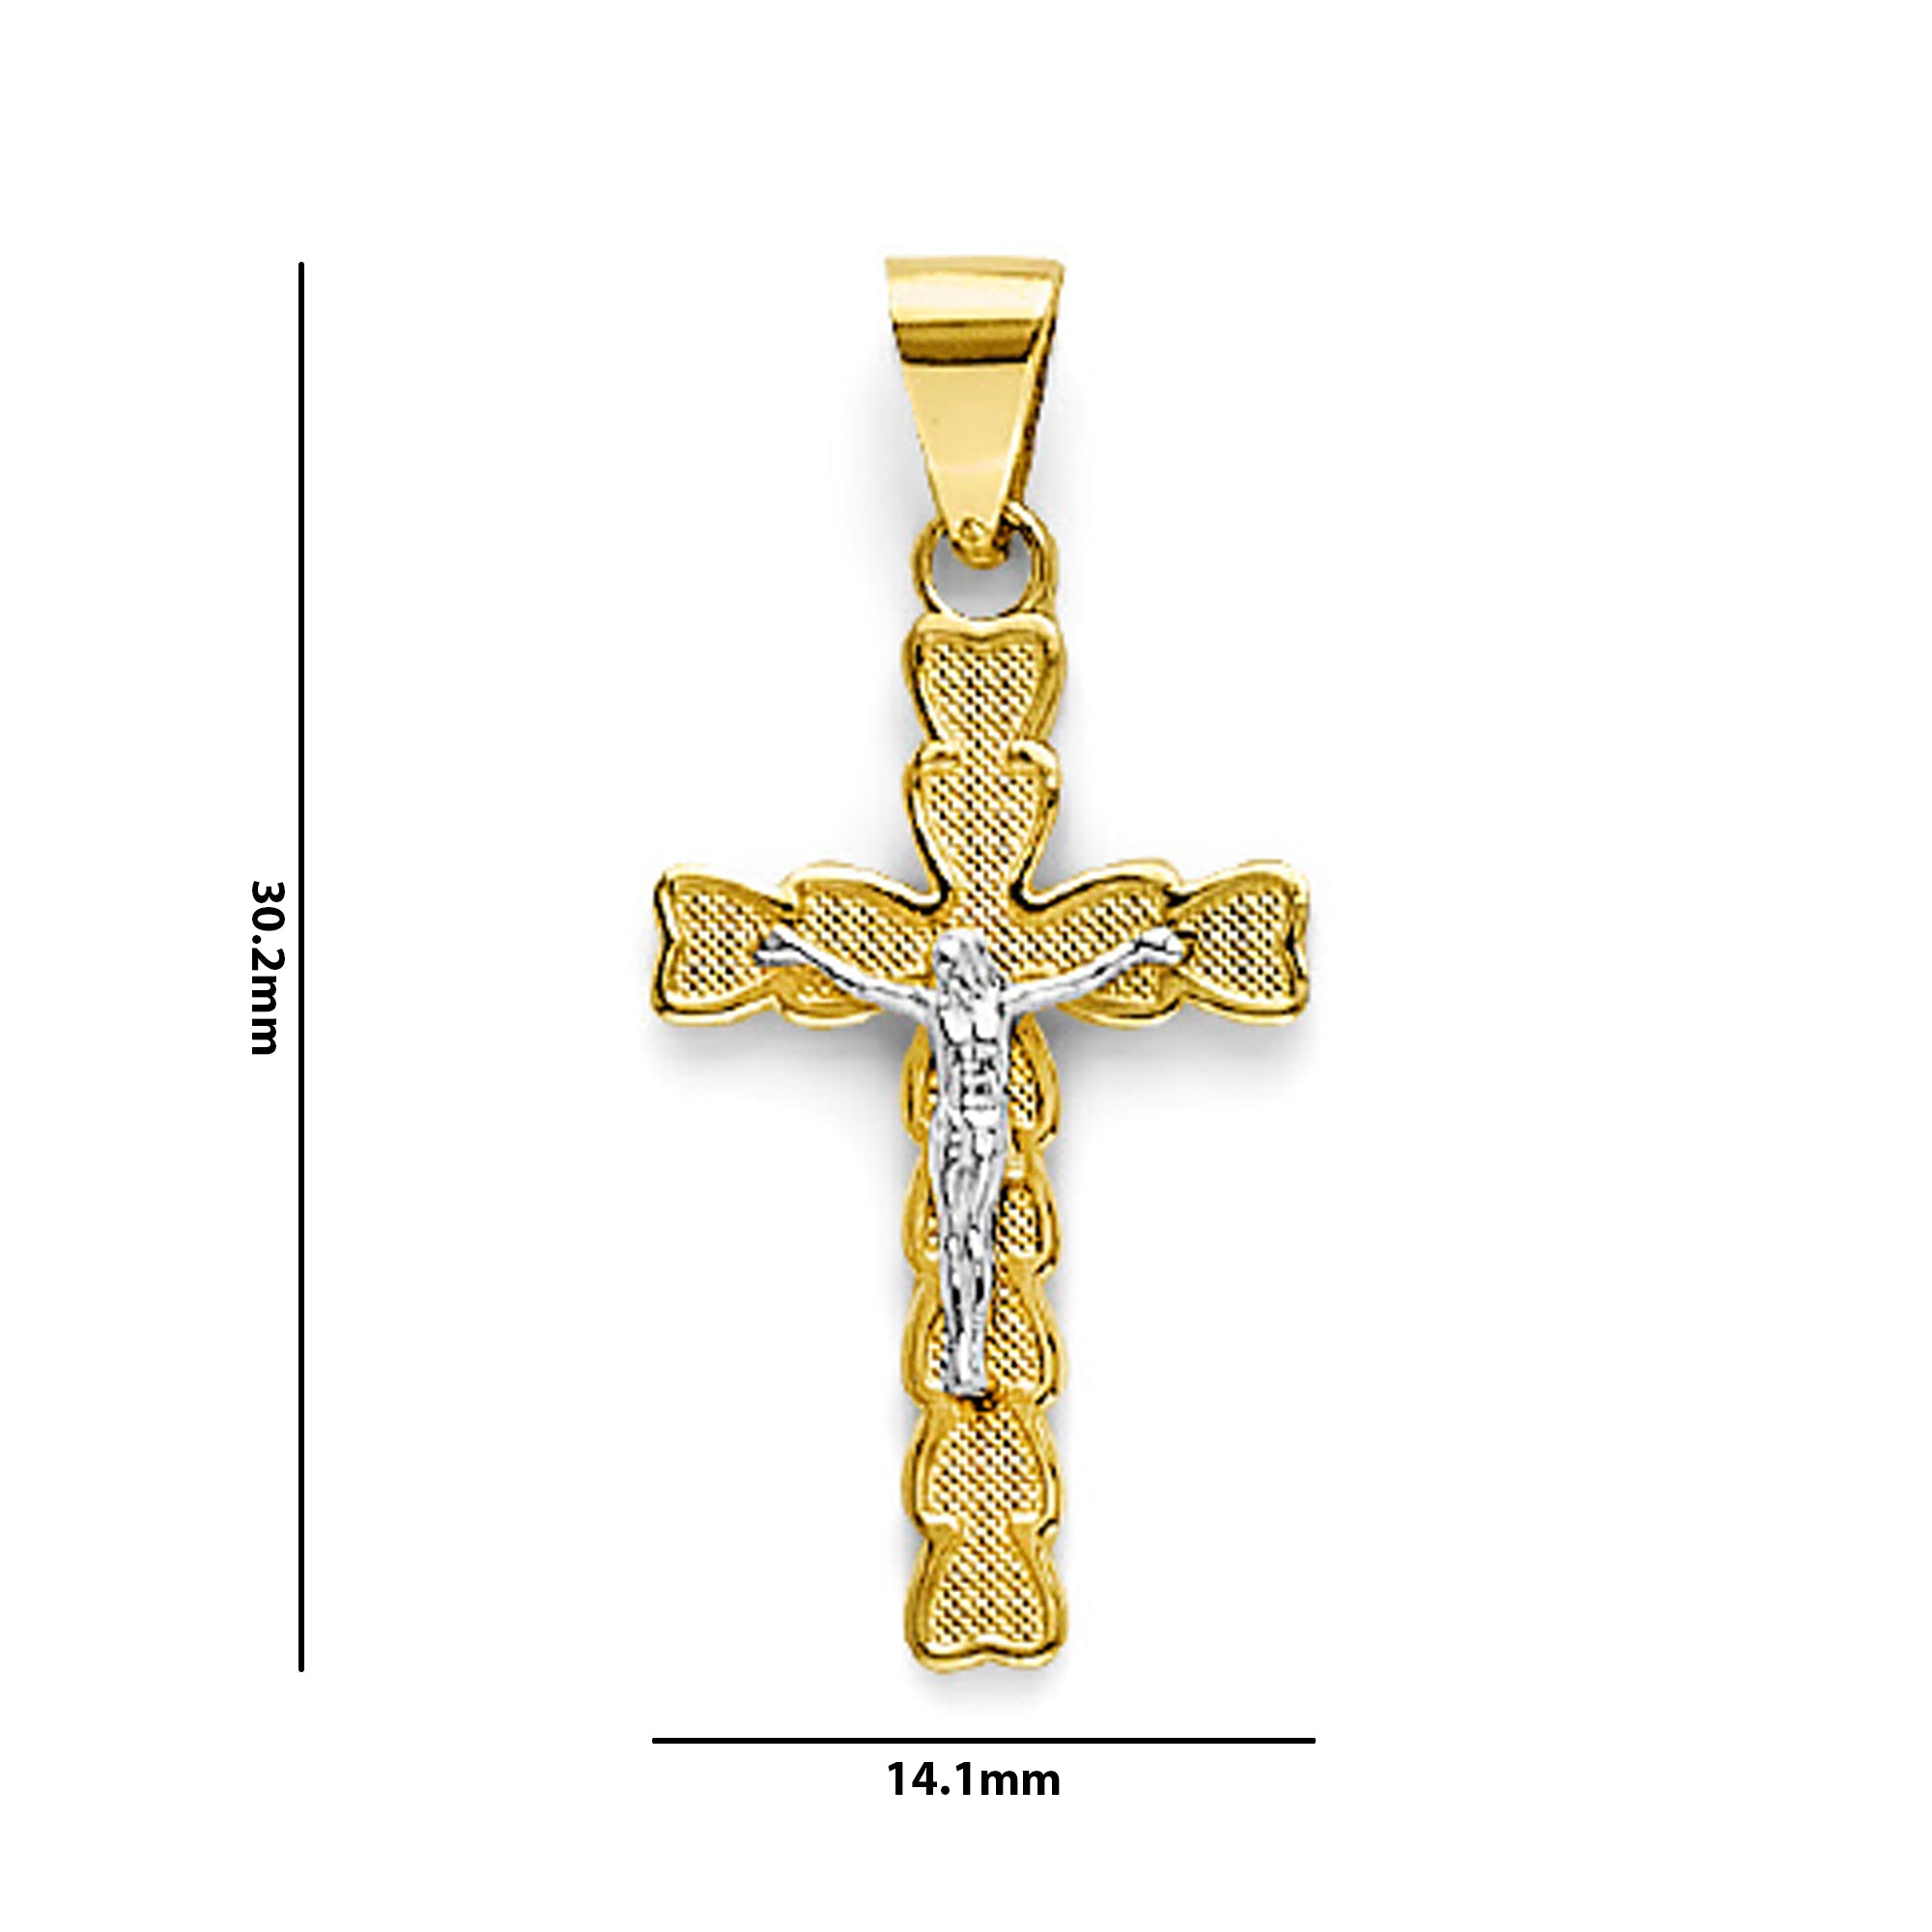 Two Tone Gold Series of Shimmer Crucifix Cross Pendant with Measurement